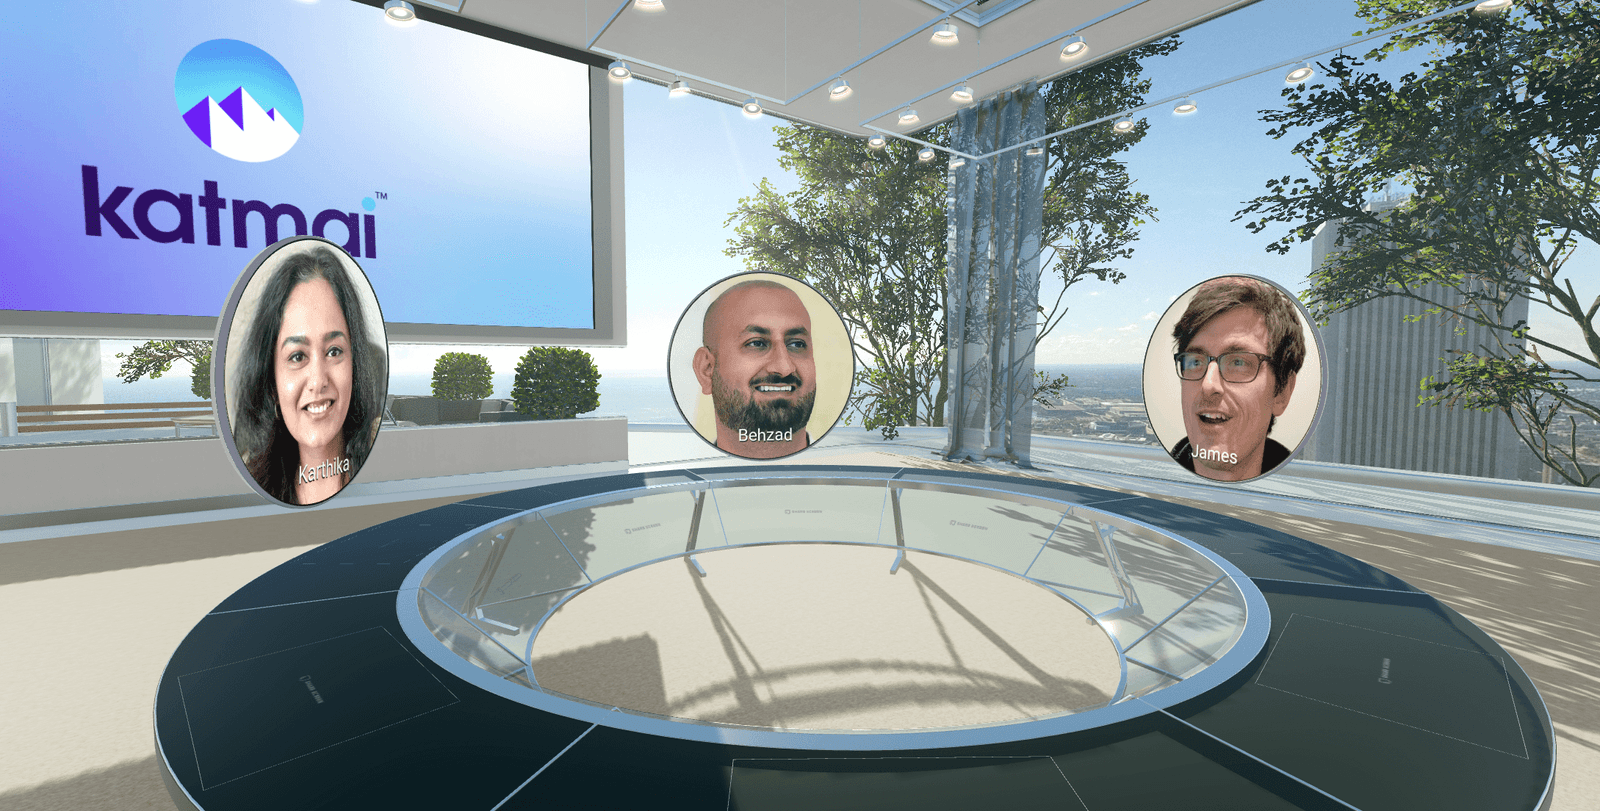 A virtual office in a 3D space with webcam avatars of employees.